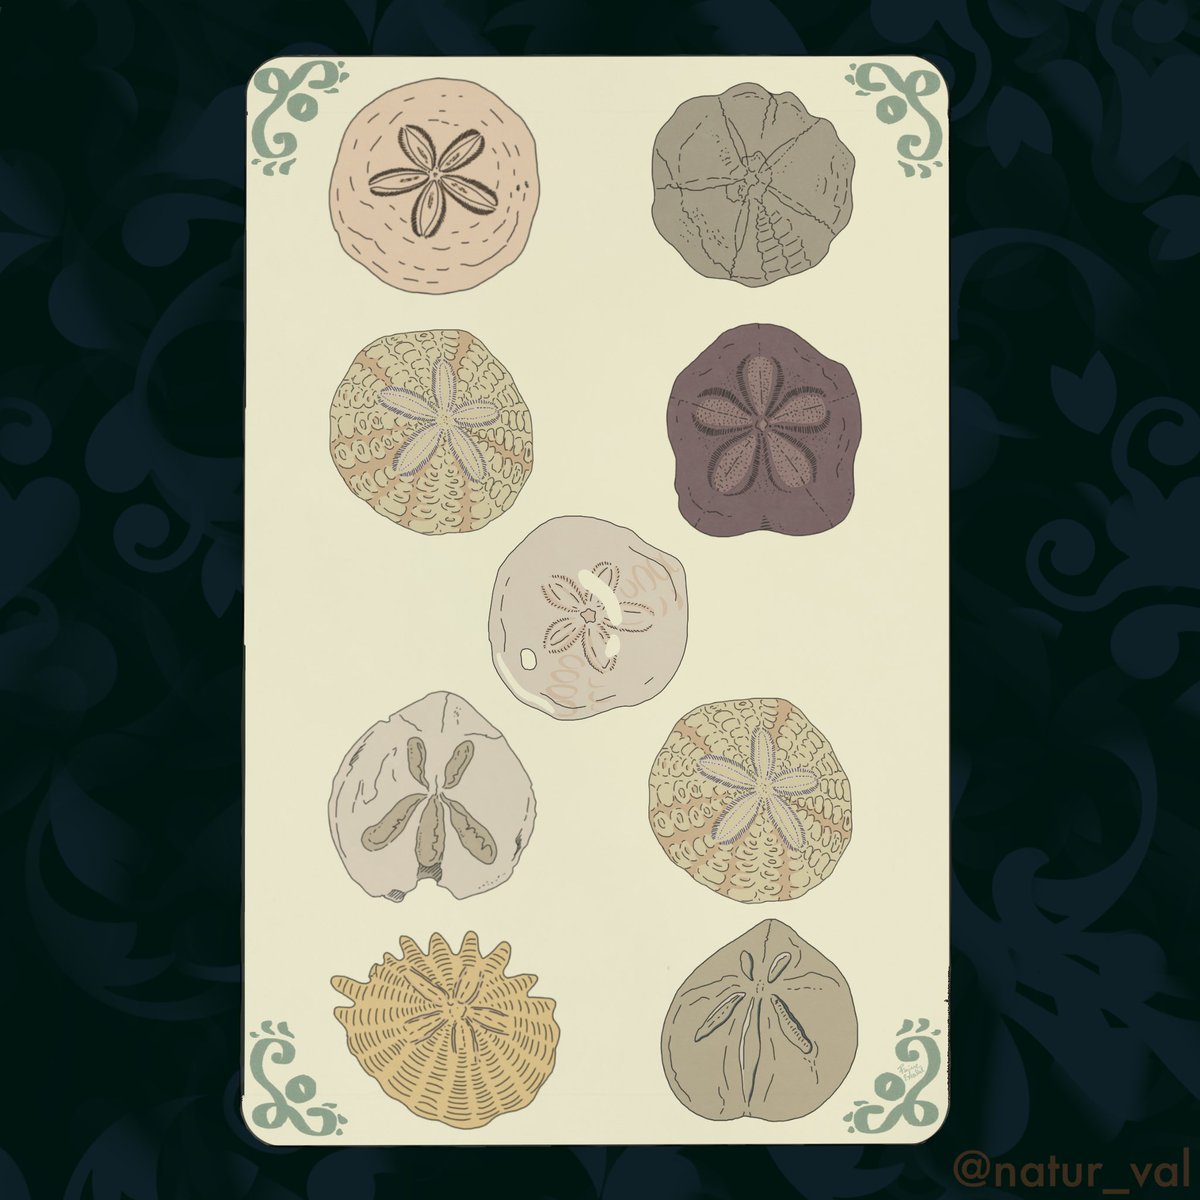 Tarots Before Time - Deniers. The suit of Pentacles. I chose “sand dollars” fossils, i.e. echinoids of the Dendrasteridae family characterized by a rounded and flattened shape that resembles a coin. P.S. There are actually a couple of interlopers from other genres. 9: serenity